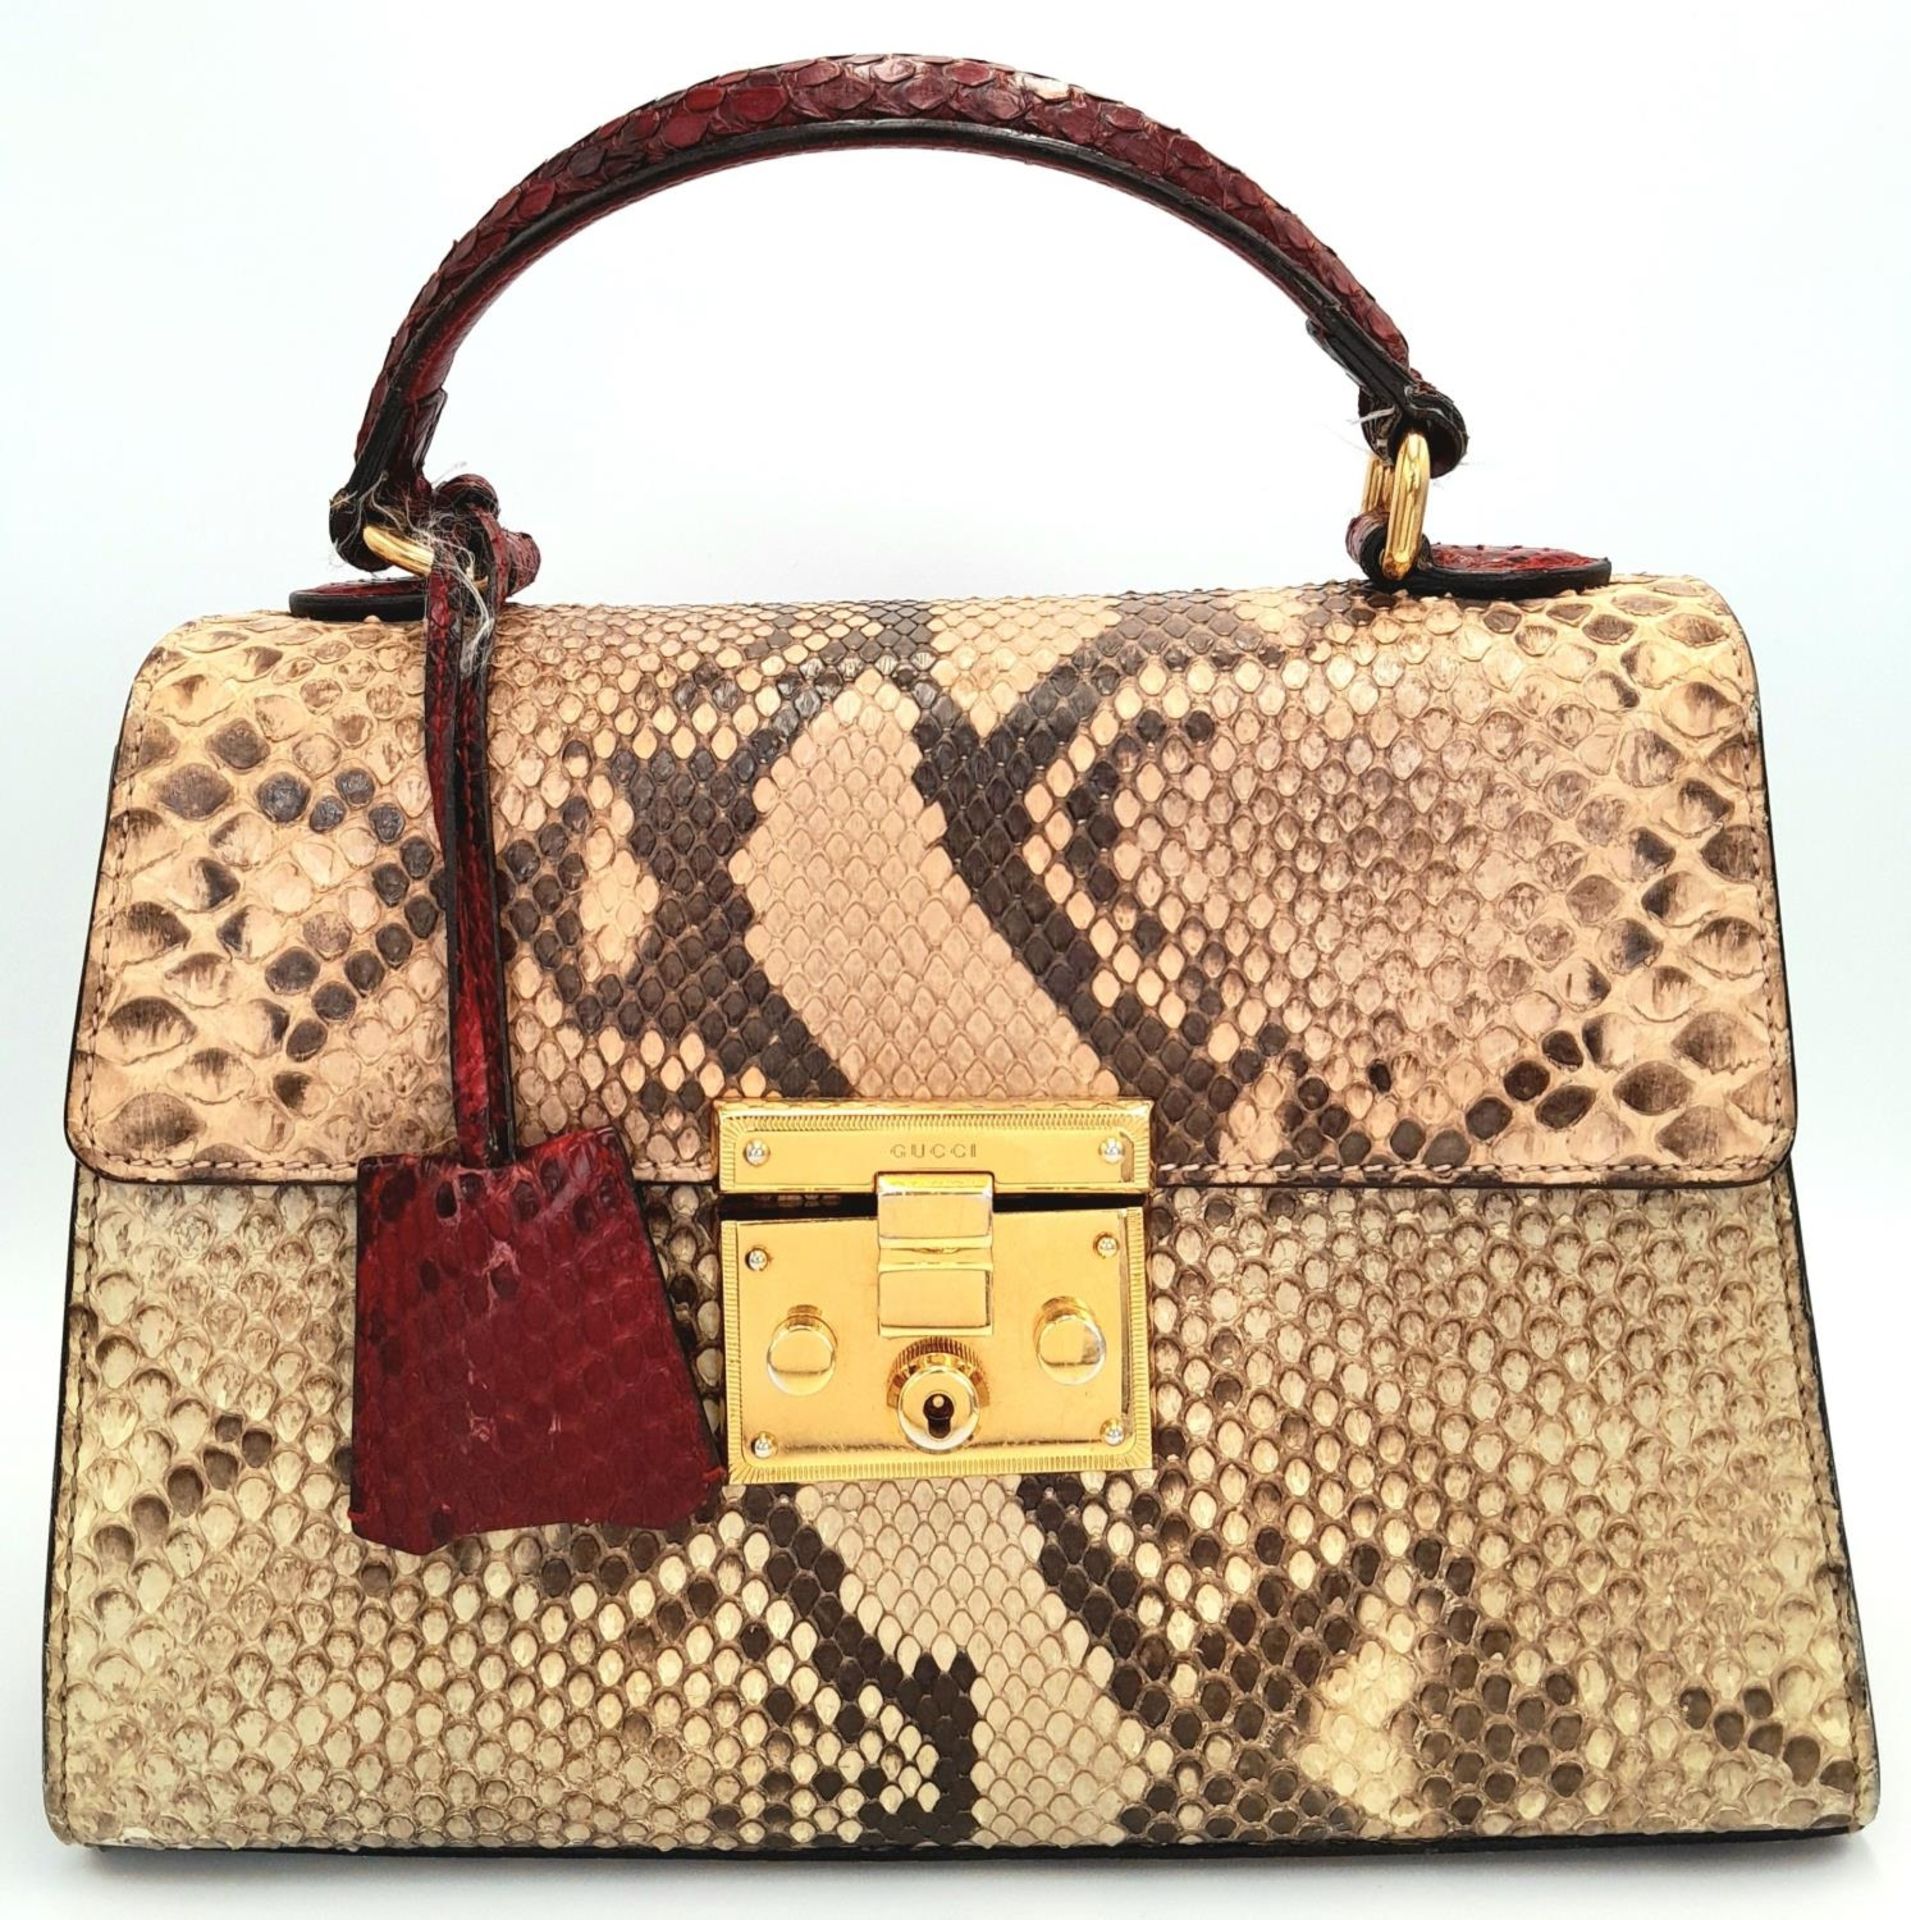 A Gucci Multi-Colour Python Padlock Bag. Python skin and leather exterior with gold-toned